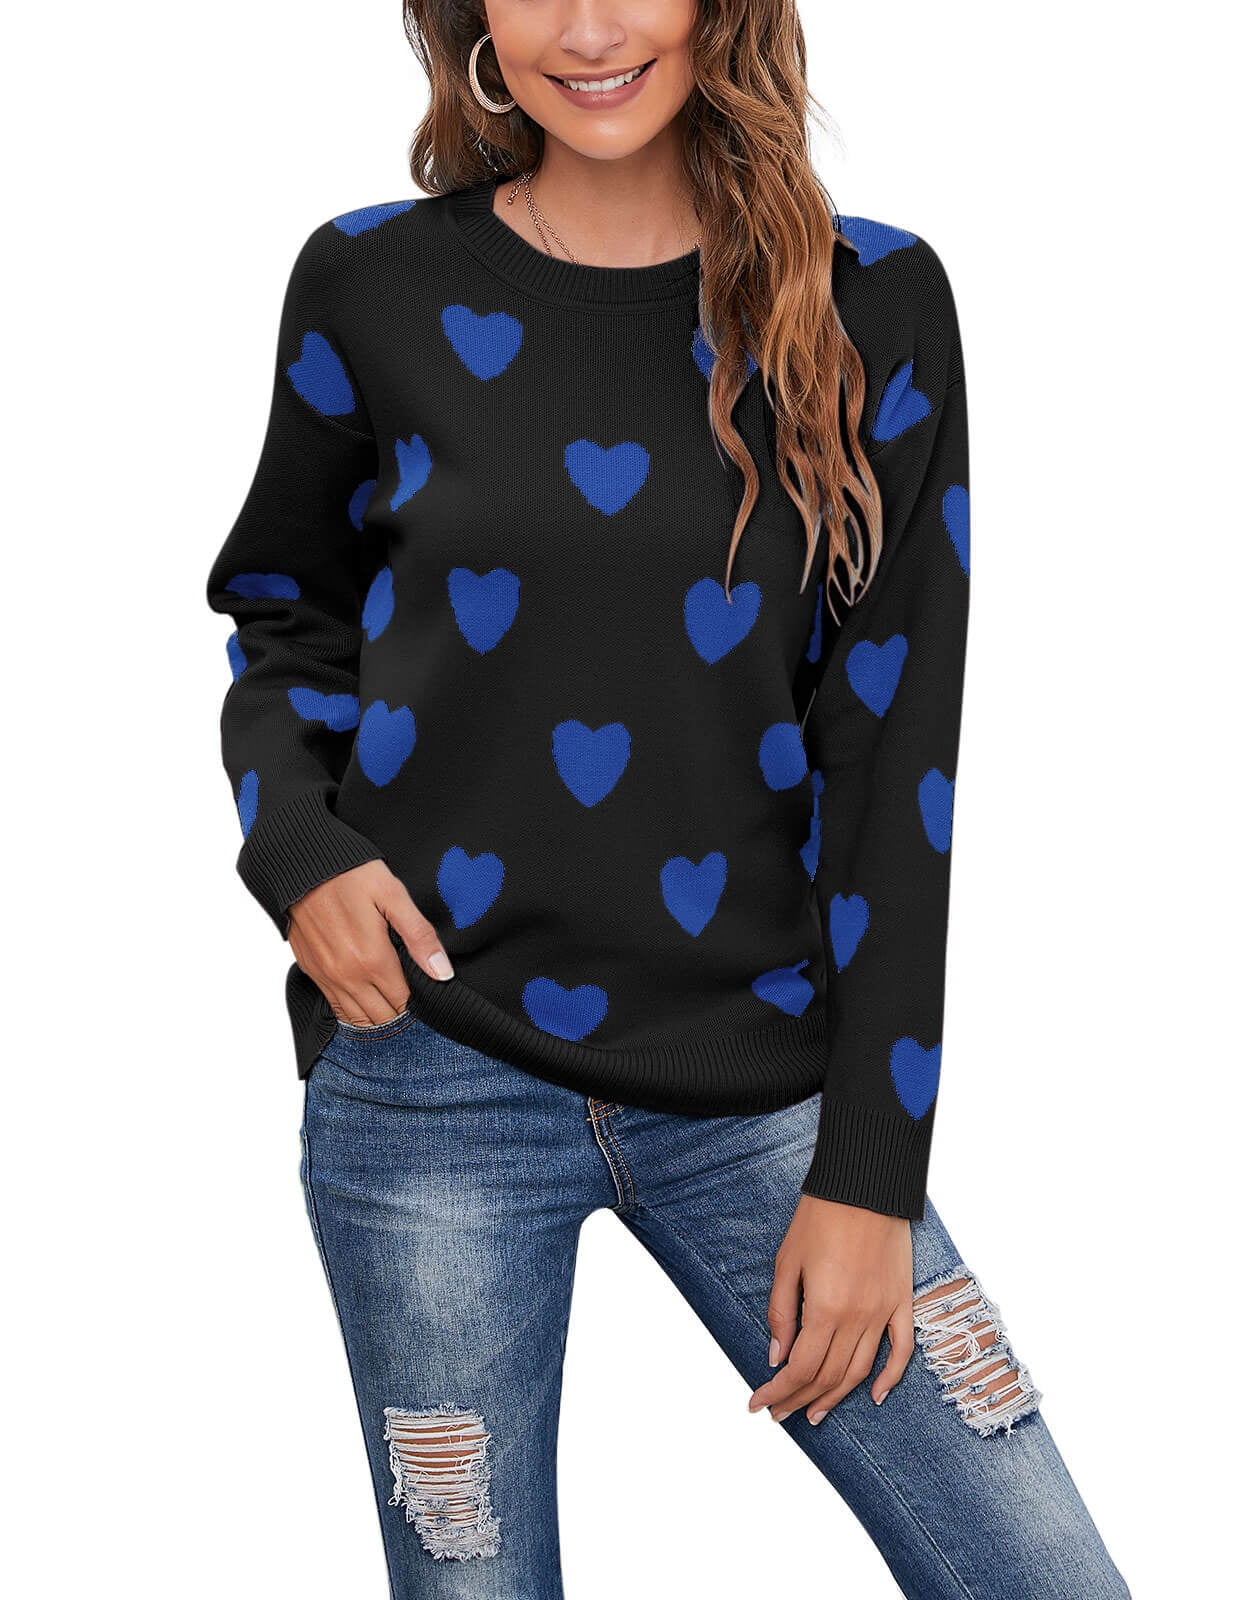 Pullover Sweater for Women Cute Heart Print Warm Sweaters Knitted ...